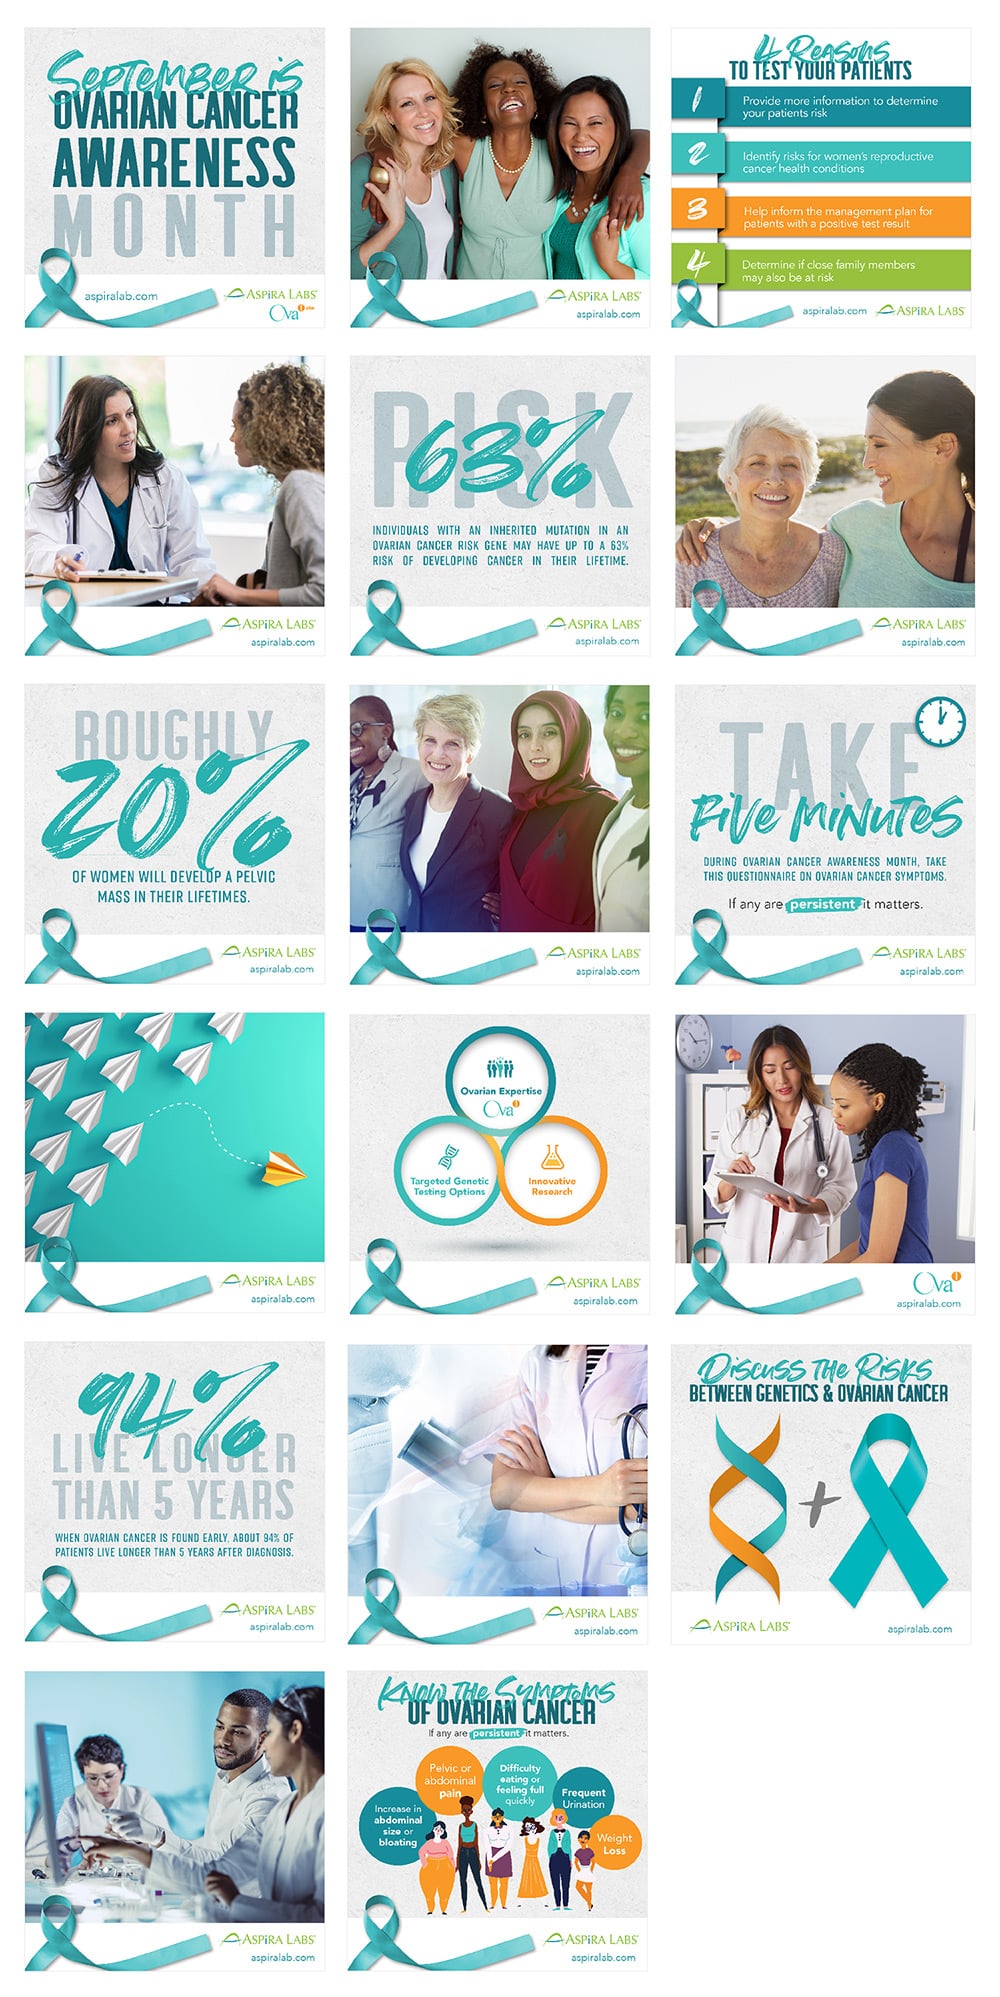 promoting ovarian cancer awareness month with graphic design linkedin posts